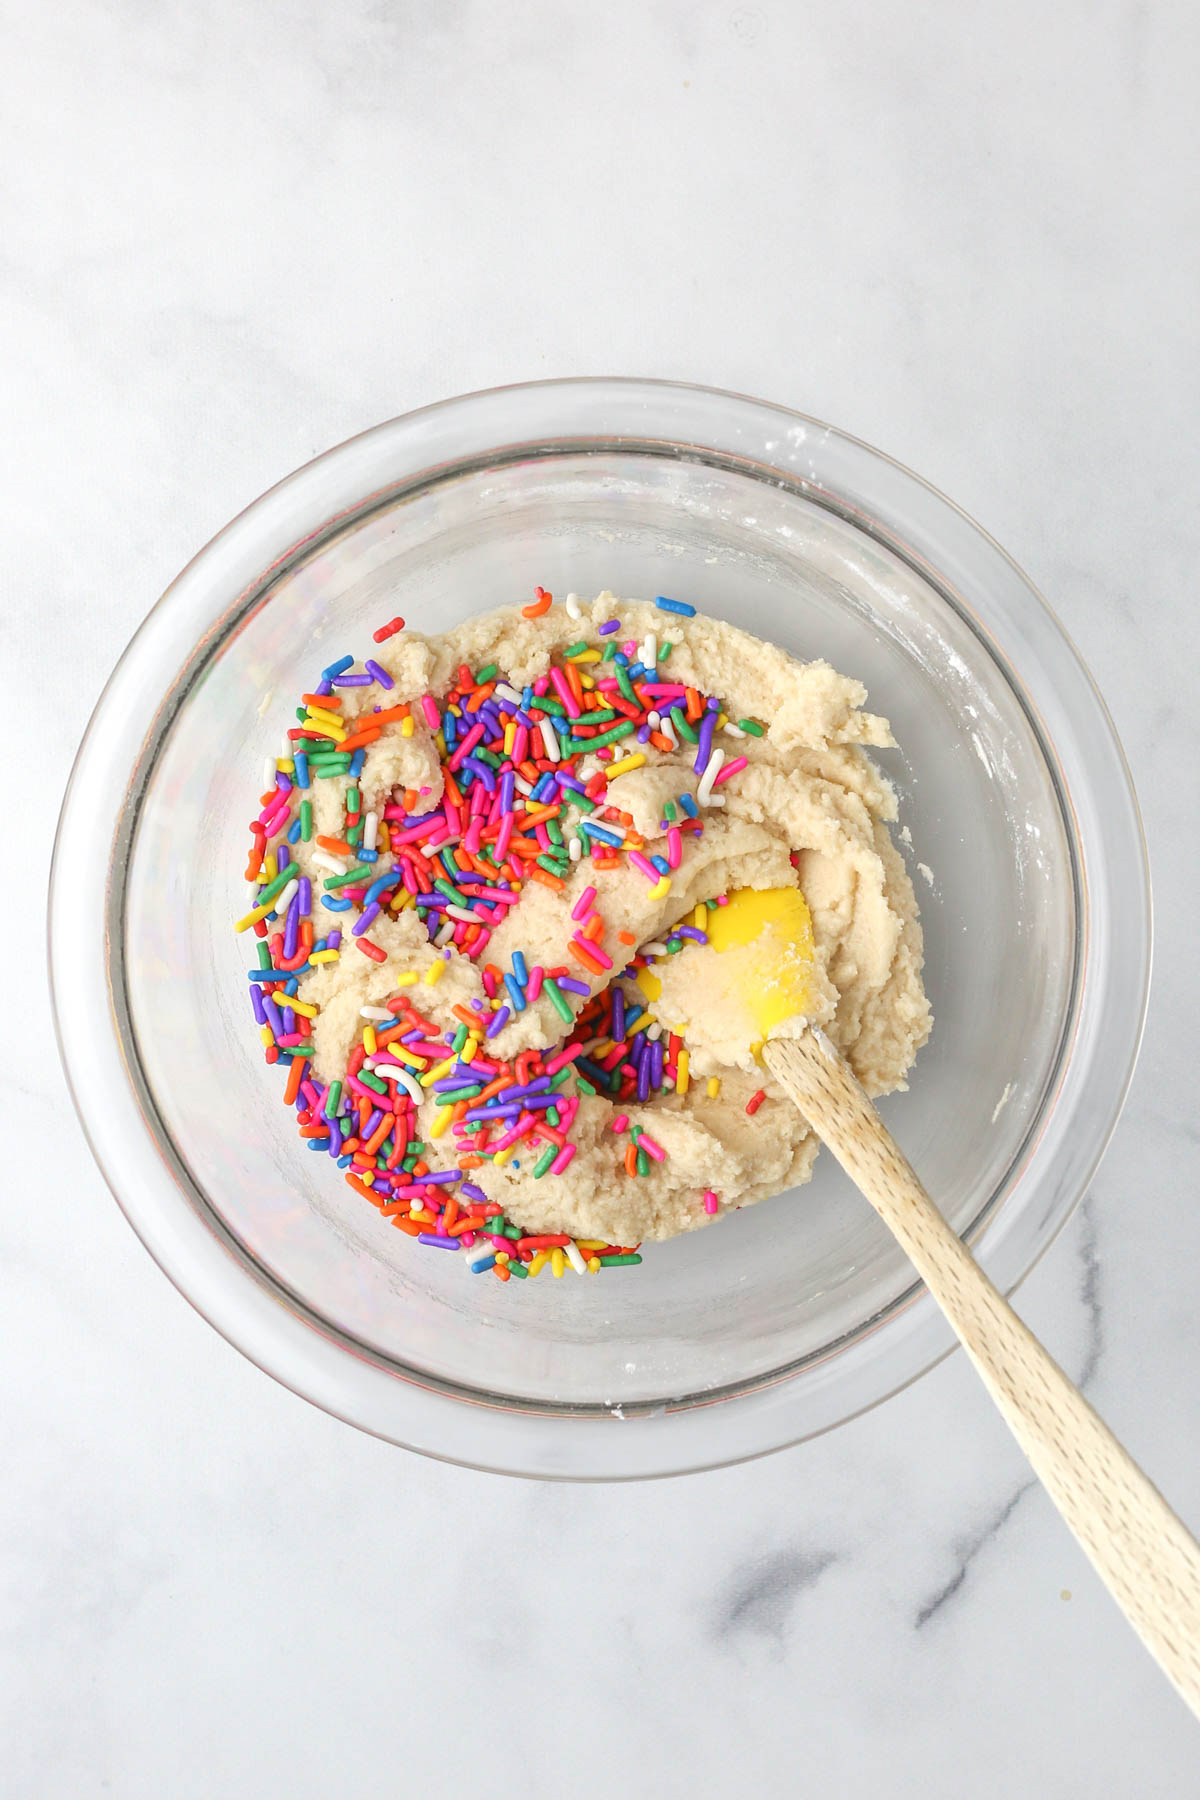 Mixing rainbow sprinkles into the edible sugar cookie dough batter.